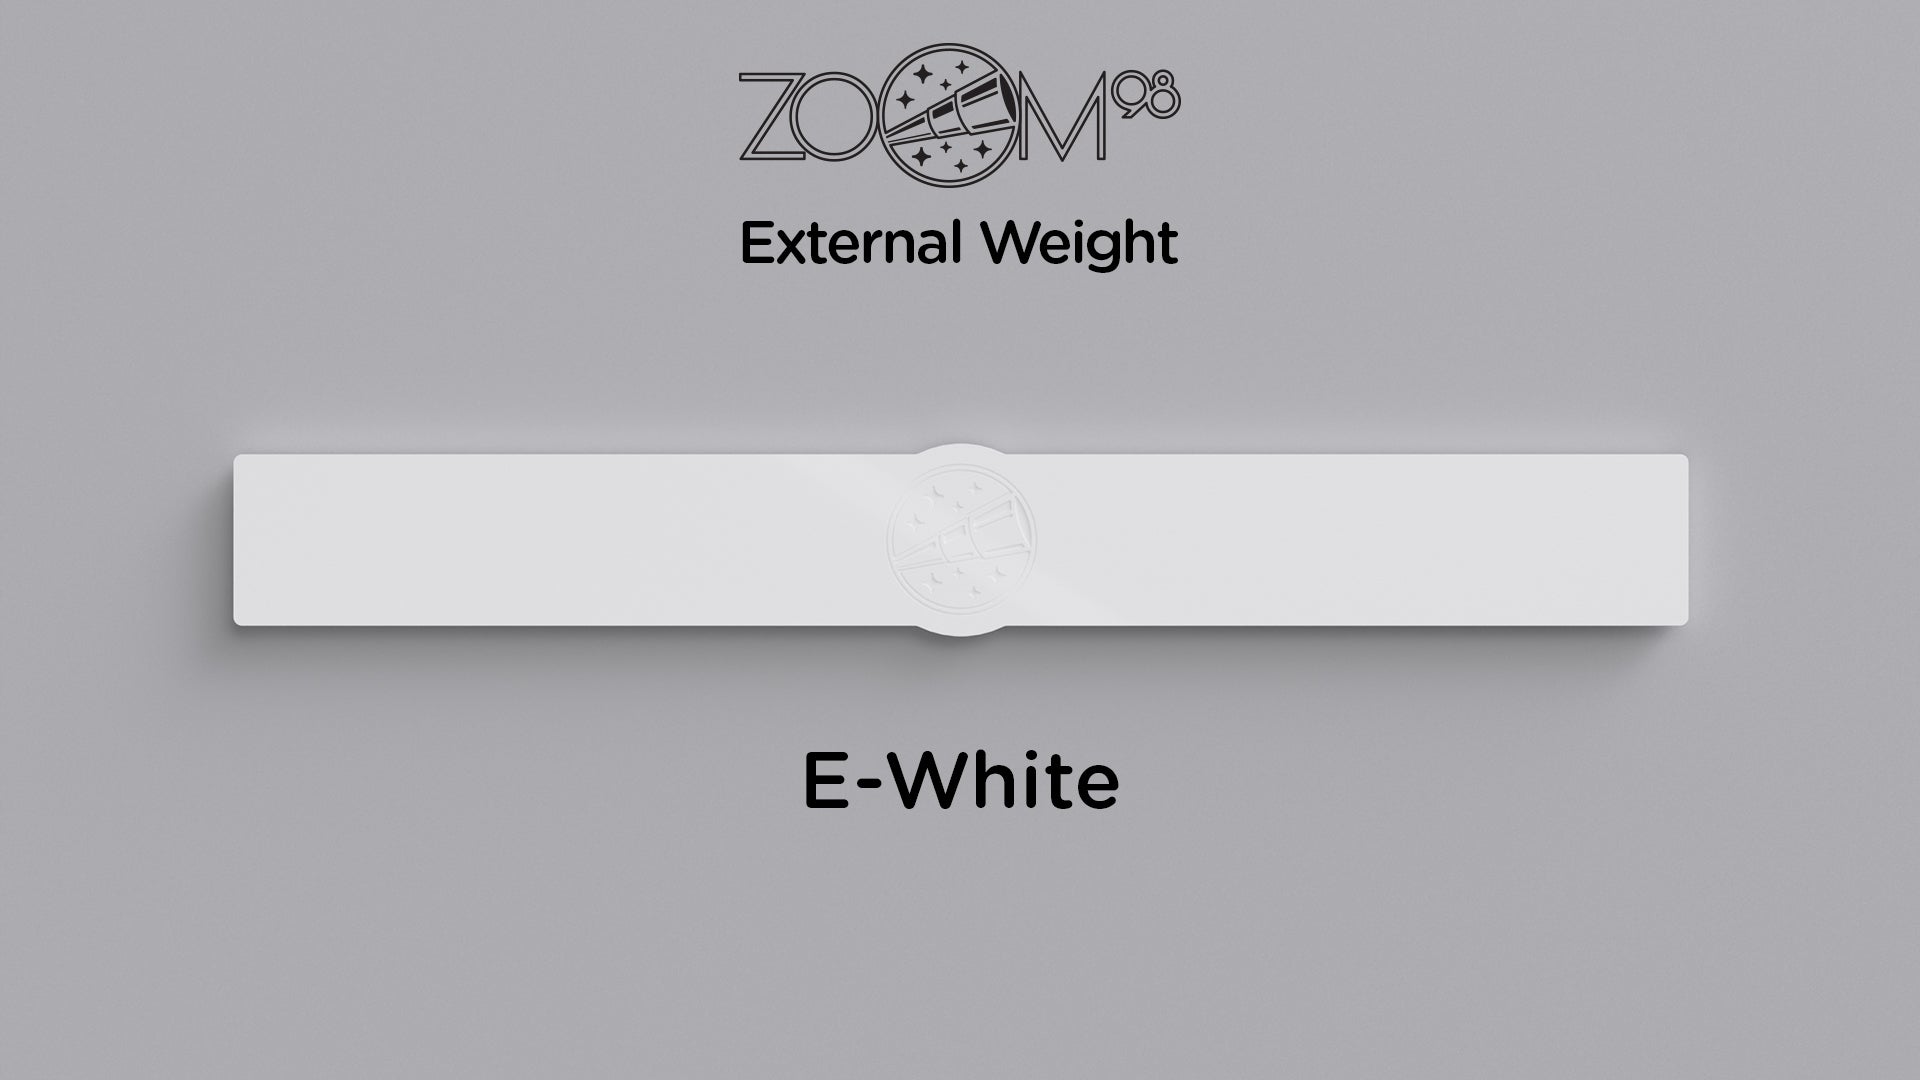 Zoom98 Extra Weights